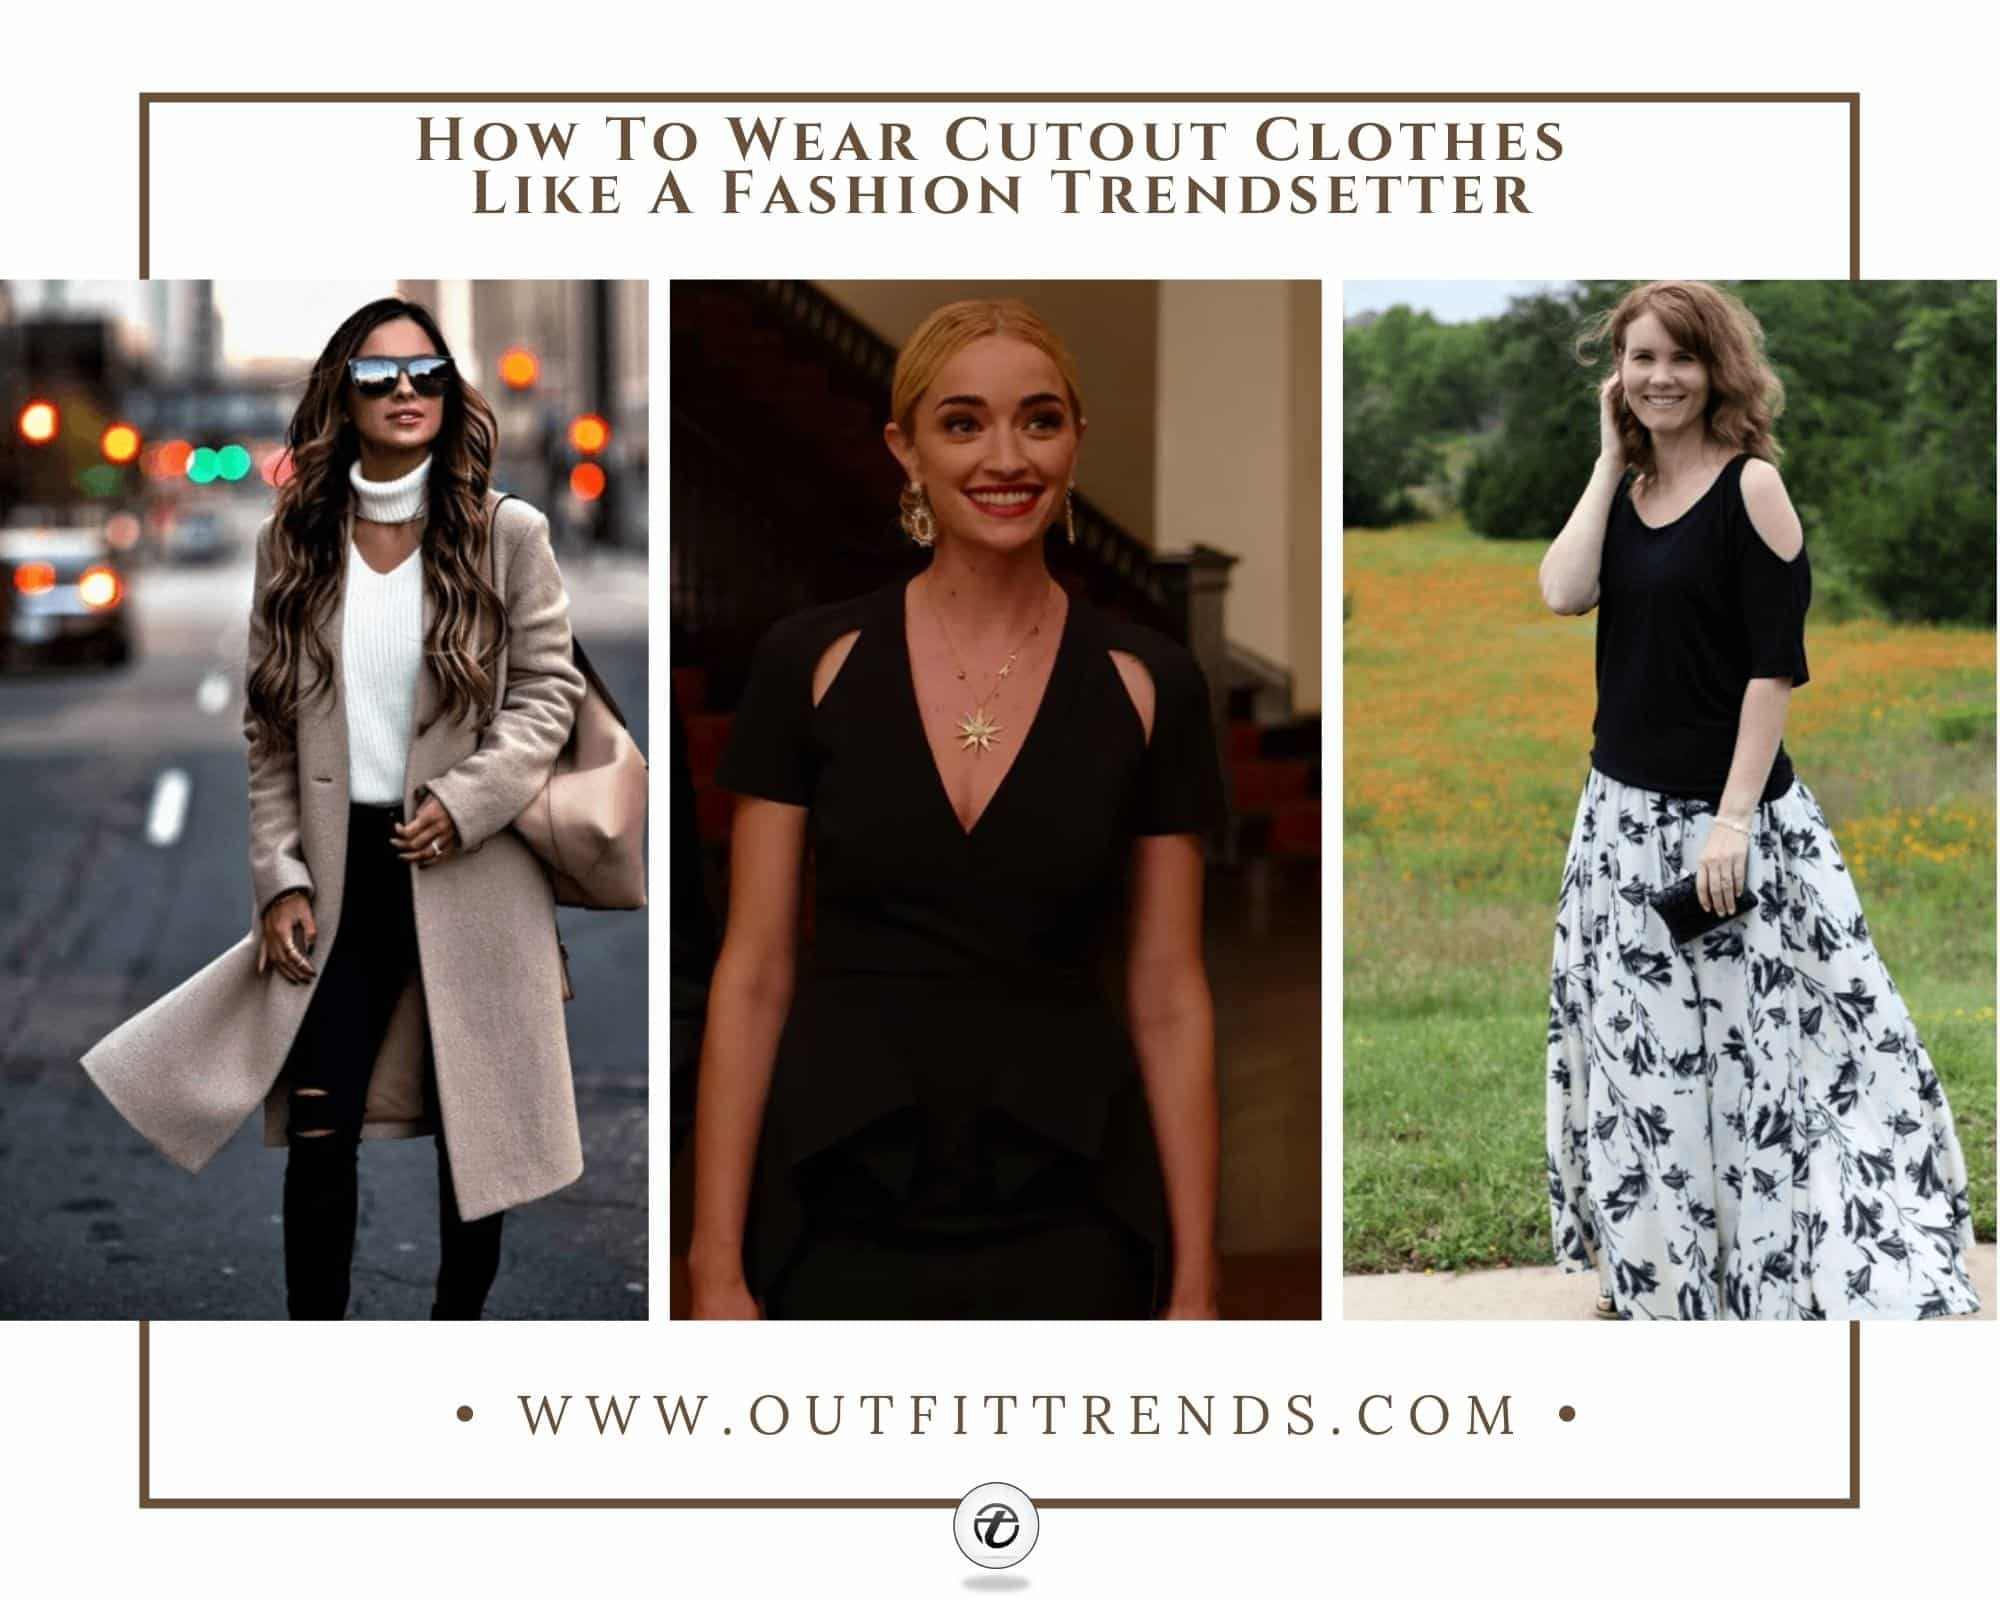 21 Best Cutout Dresses & Tips on How to wear Cutout Clothes